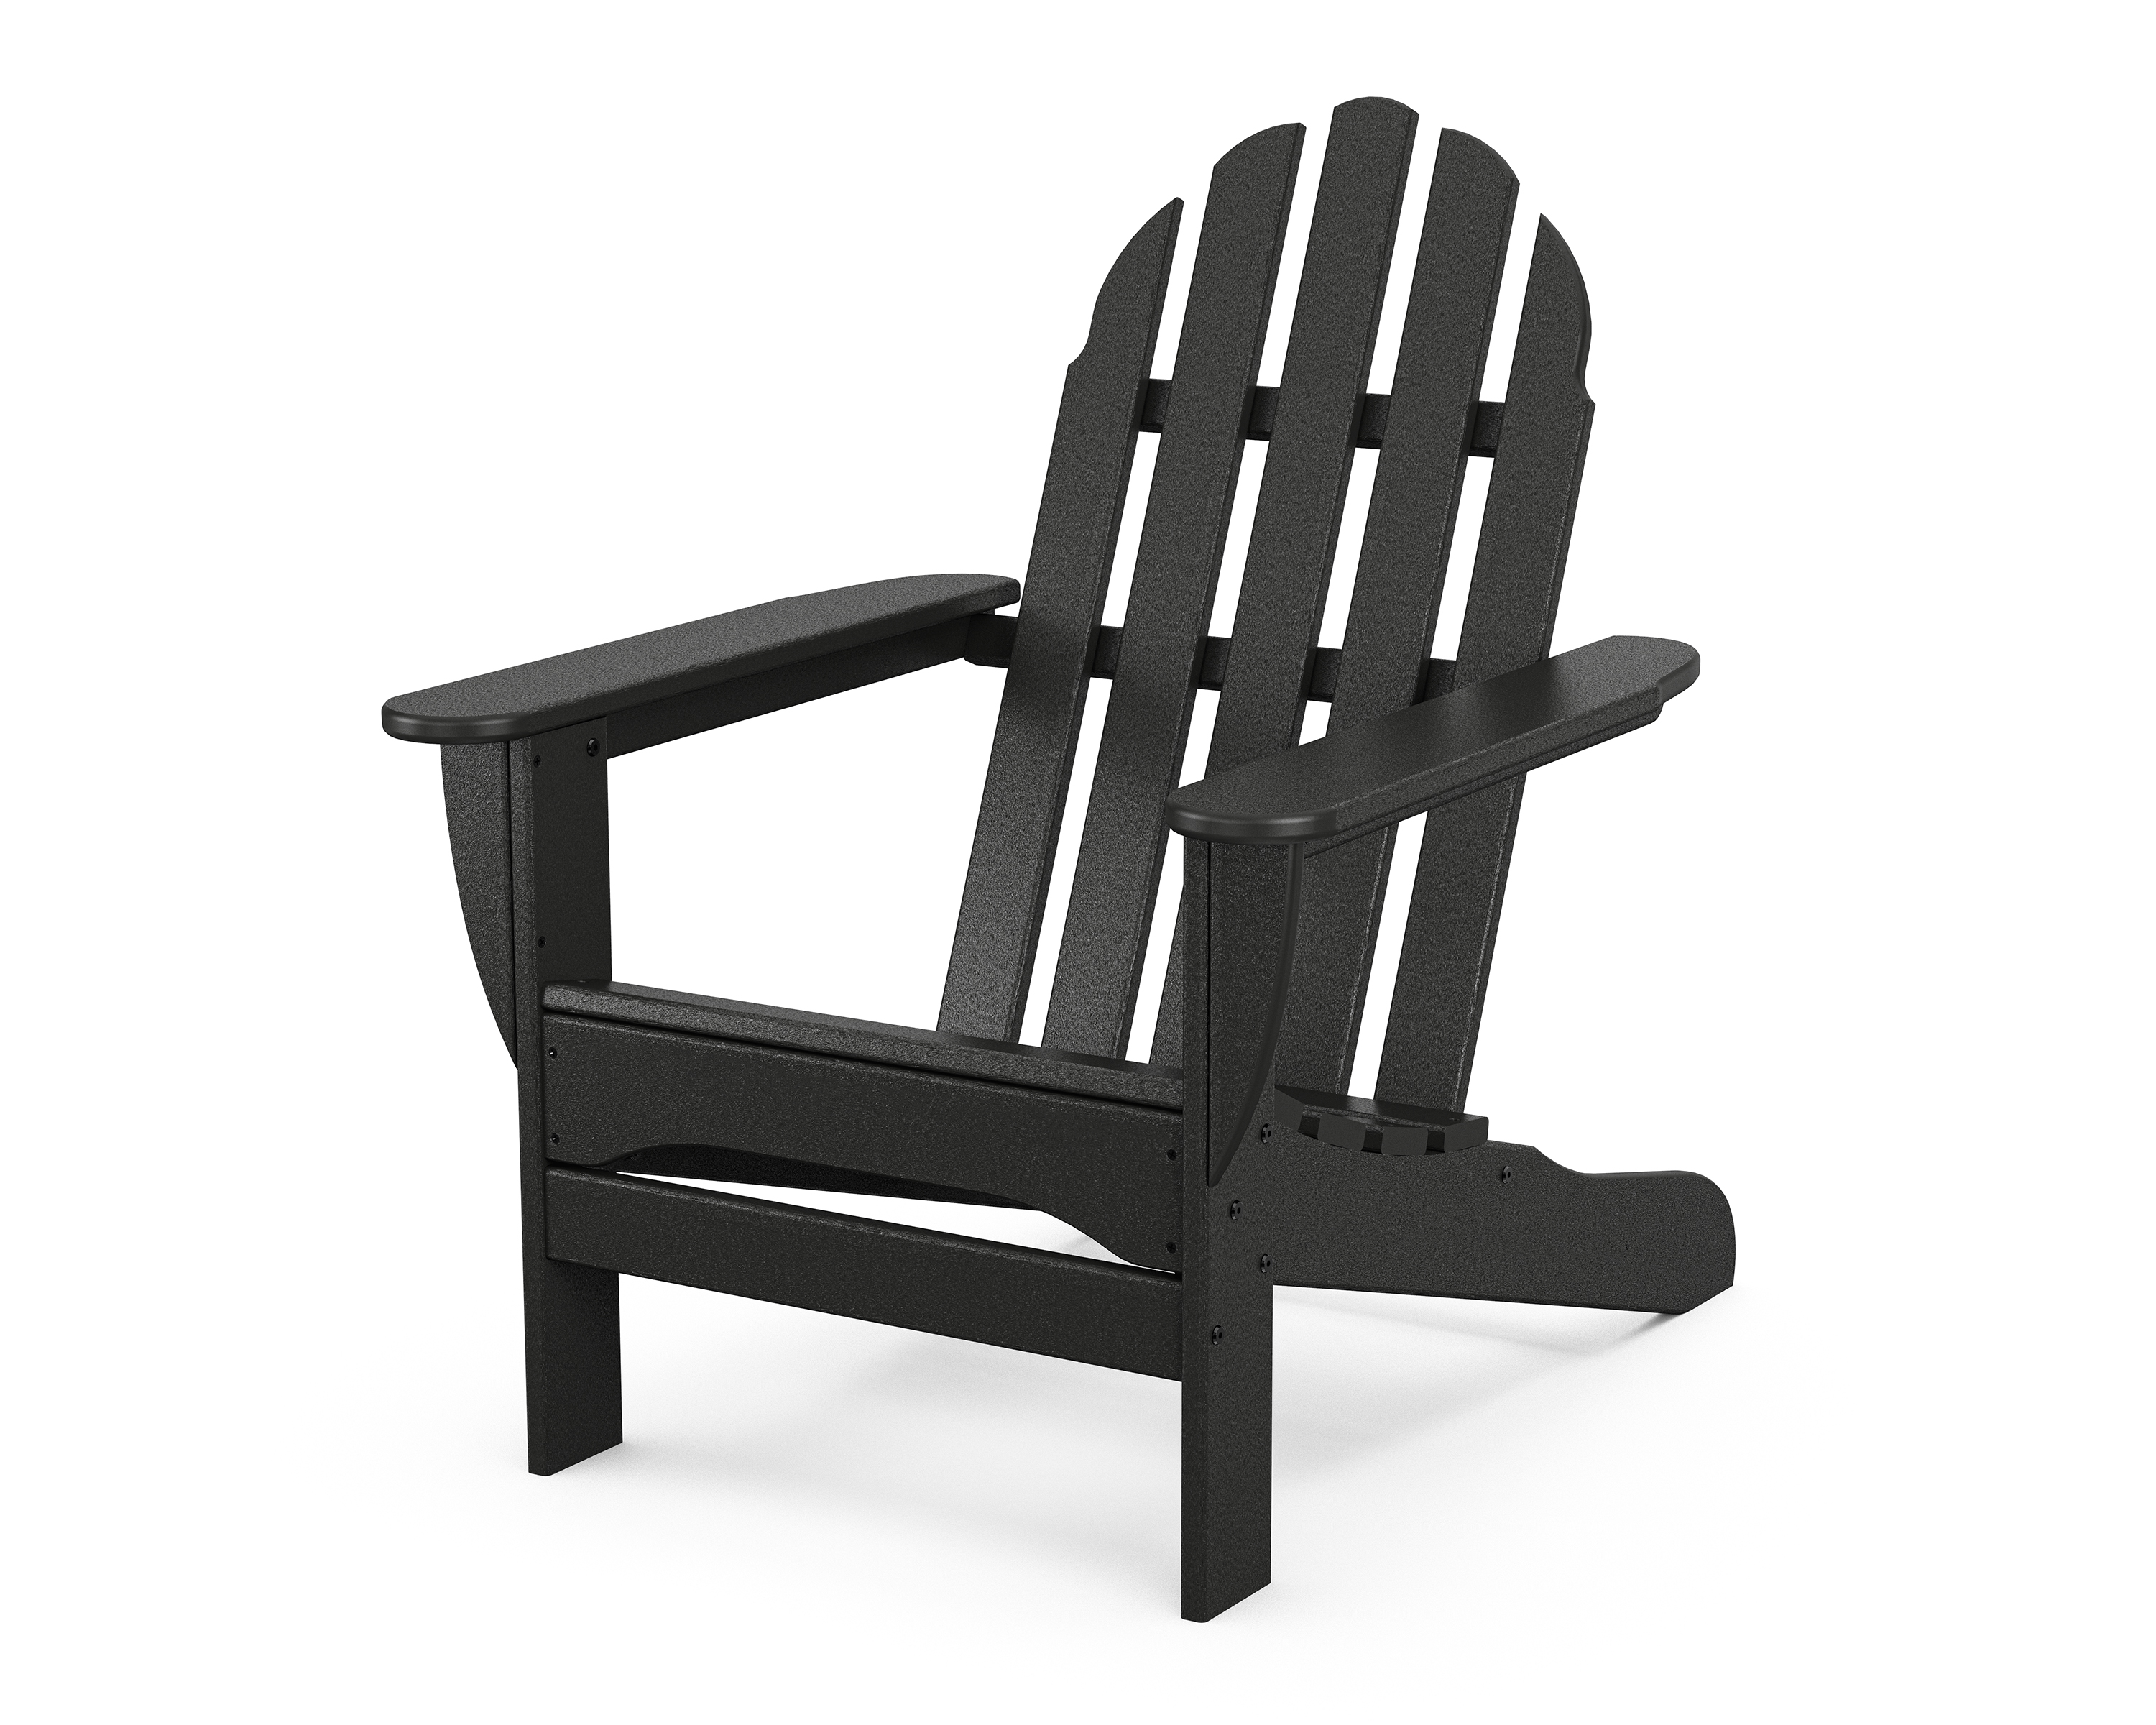 POLYWOOD Classic Adirondack 3-Piece Set with South Beach 18" Side Table in Black - image 2 of 5